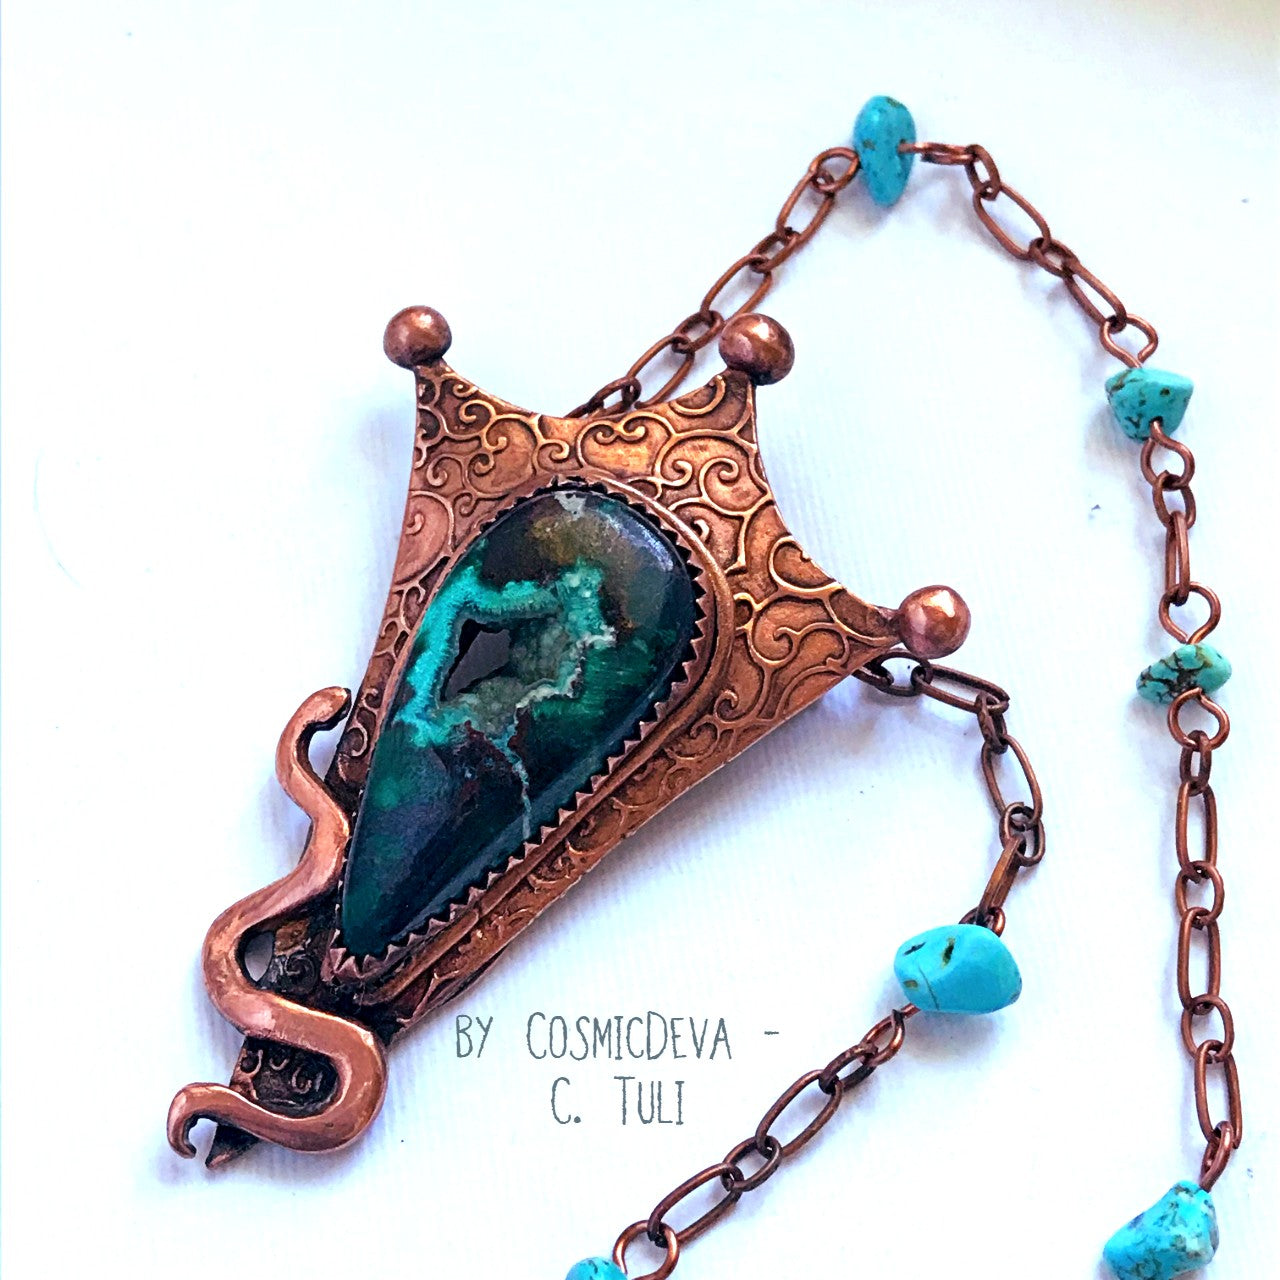 This unique Chrysocolla with Malachite and traces of cuprite gemstone is nestled amidst a complete hand sculptured triangle pendant with a little snake winding up in rich and warm glowing copper and has beautiful swirl texture. This rustic copper statement necklace suspends from a copper chain with natural turquoise beads. The copper jewelry piece was oxidized for a deep warm finish. Botryoidal Chrysocolla Copper Snake Pendant Necklace - CosmicDeva